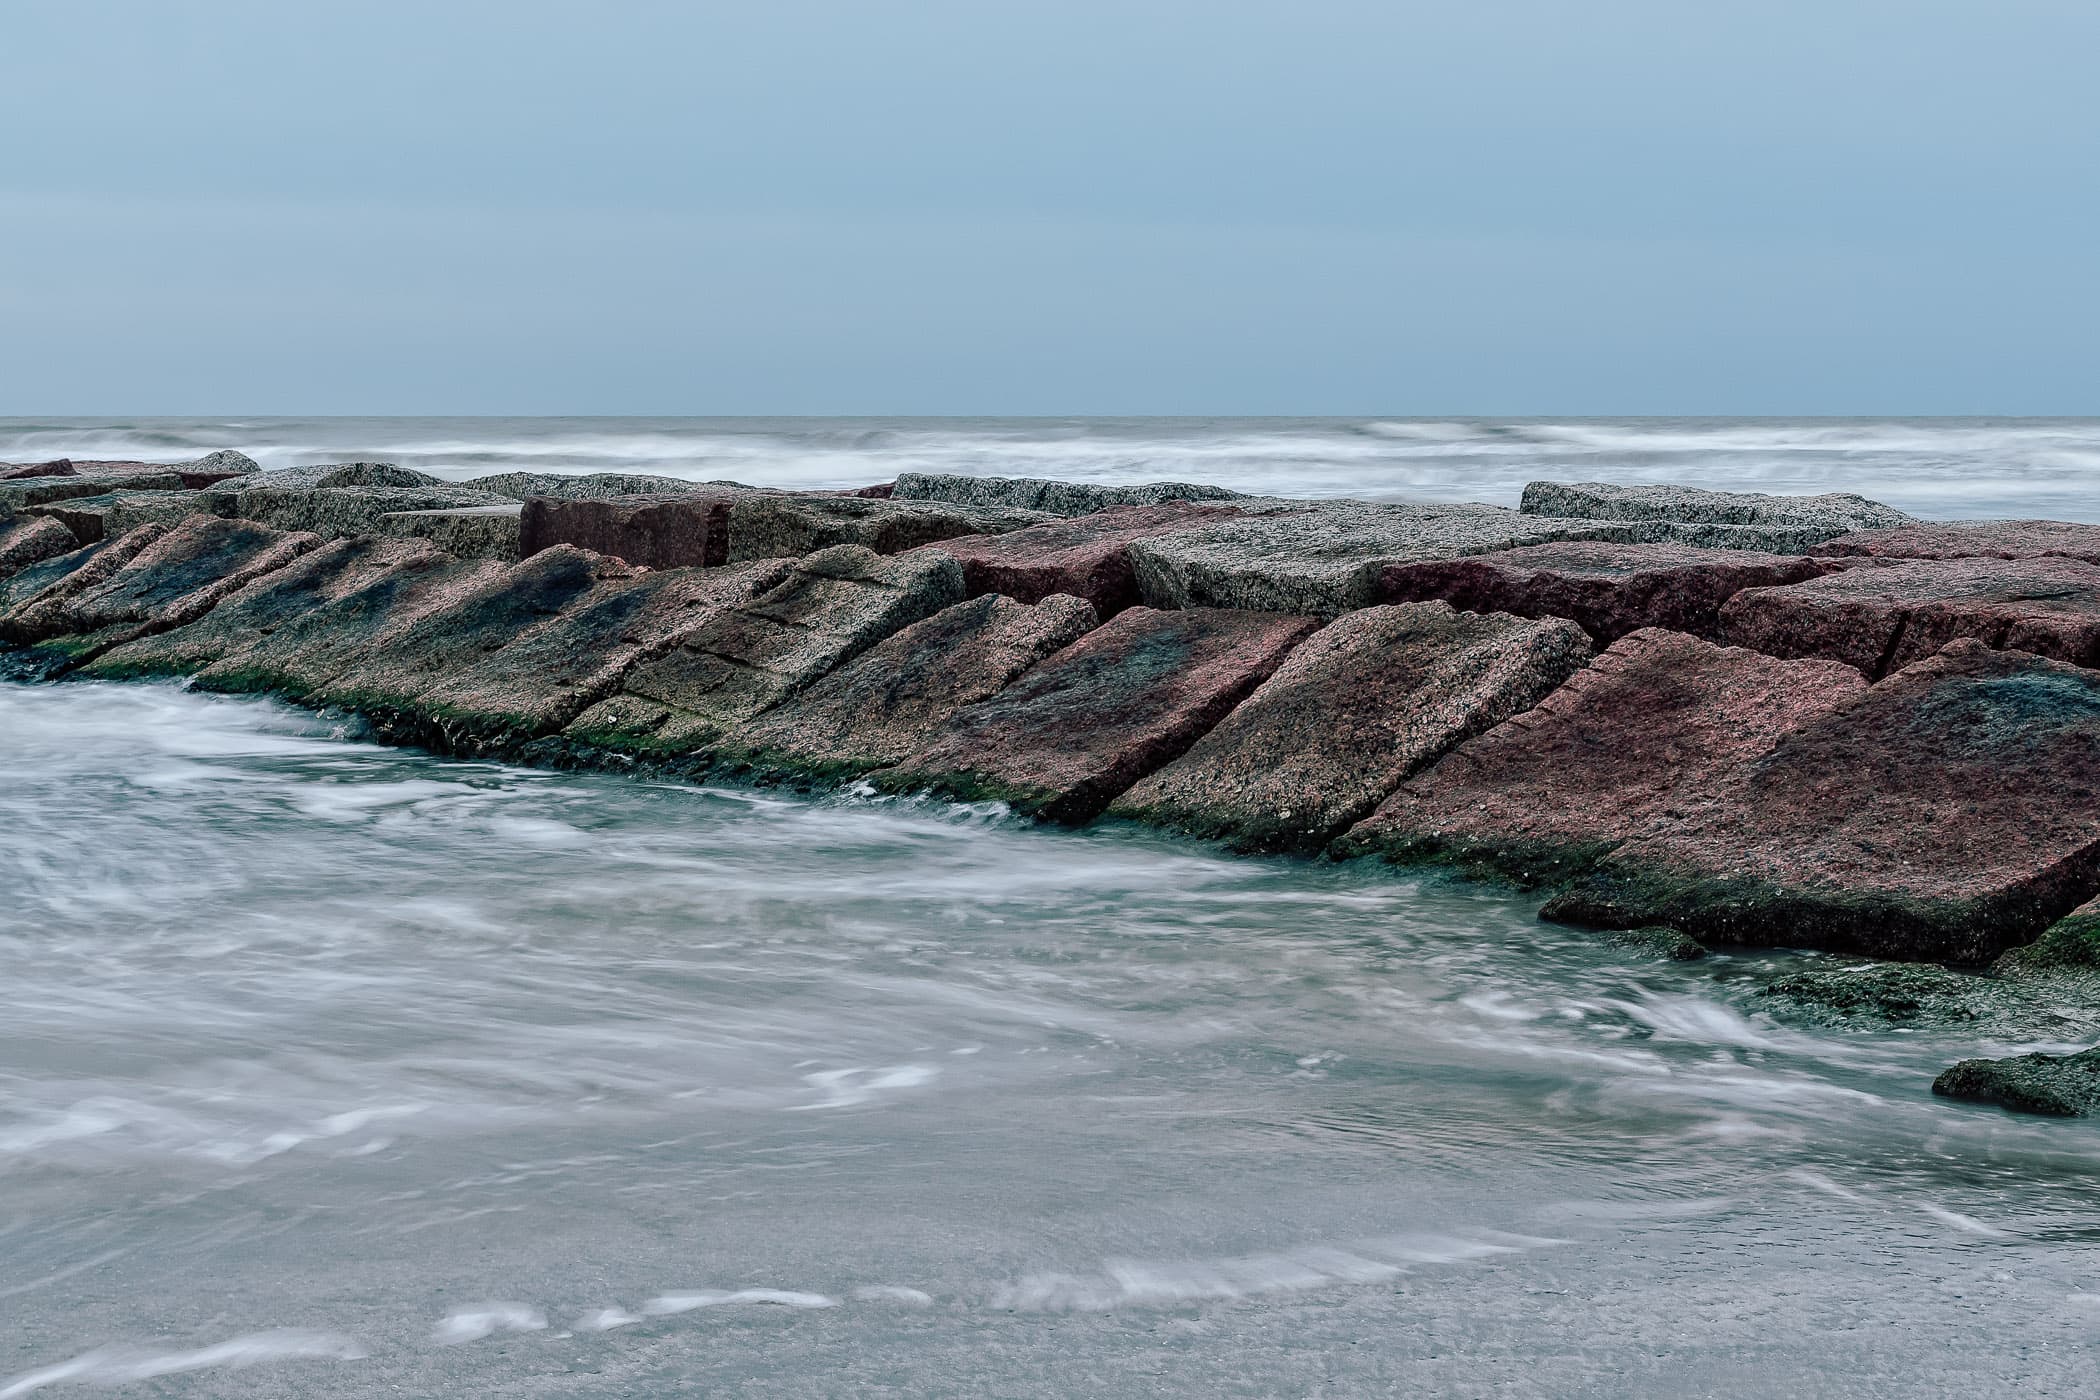 A granite jetty or, more-properly, groyne, reaches into the Gulf of Mexico from the Galveston Island, Texas, beach.